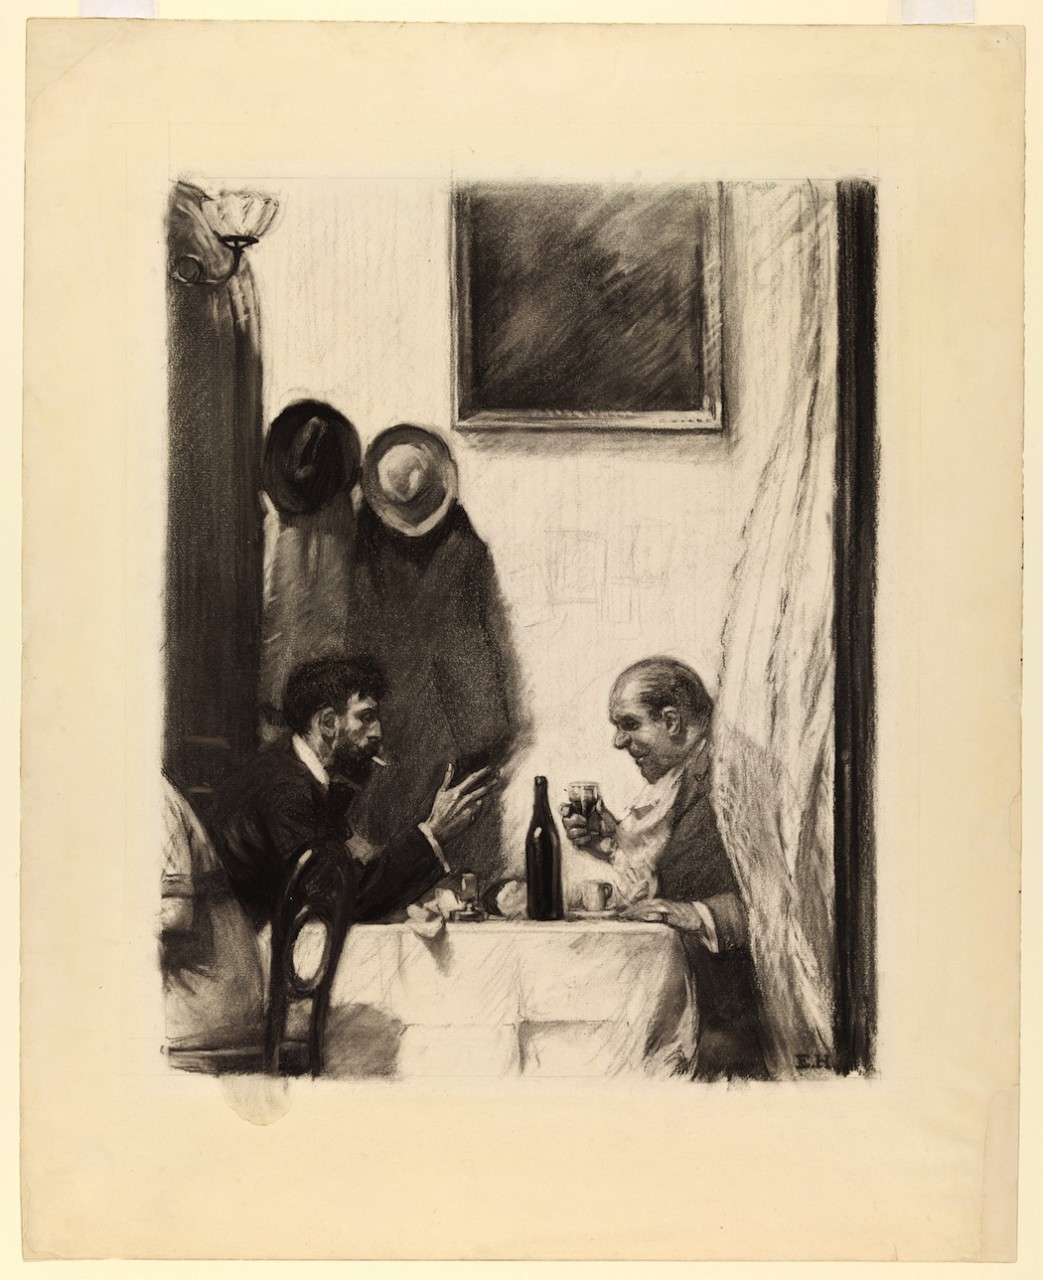 Edward Hopper (1882 1967). (In a Restaurant), (c. 1916 1925). Charcoal on paper, Sheet: 26 11/16 x 21 5/8in. (67.8 x 54.9cm). Whitney Museum of American Art, New York; Josephine N. Hopper Bequest 70.1449 © Heirs of Josephine N. Hopper, licensed by Whitney Museum of American Art Digital Image © Whitney Museum of American Art